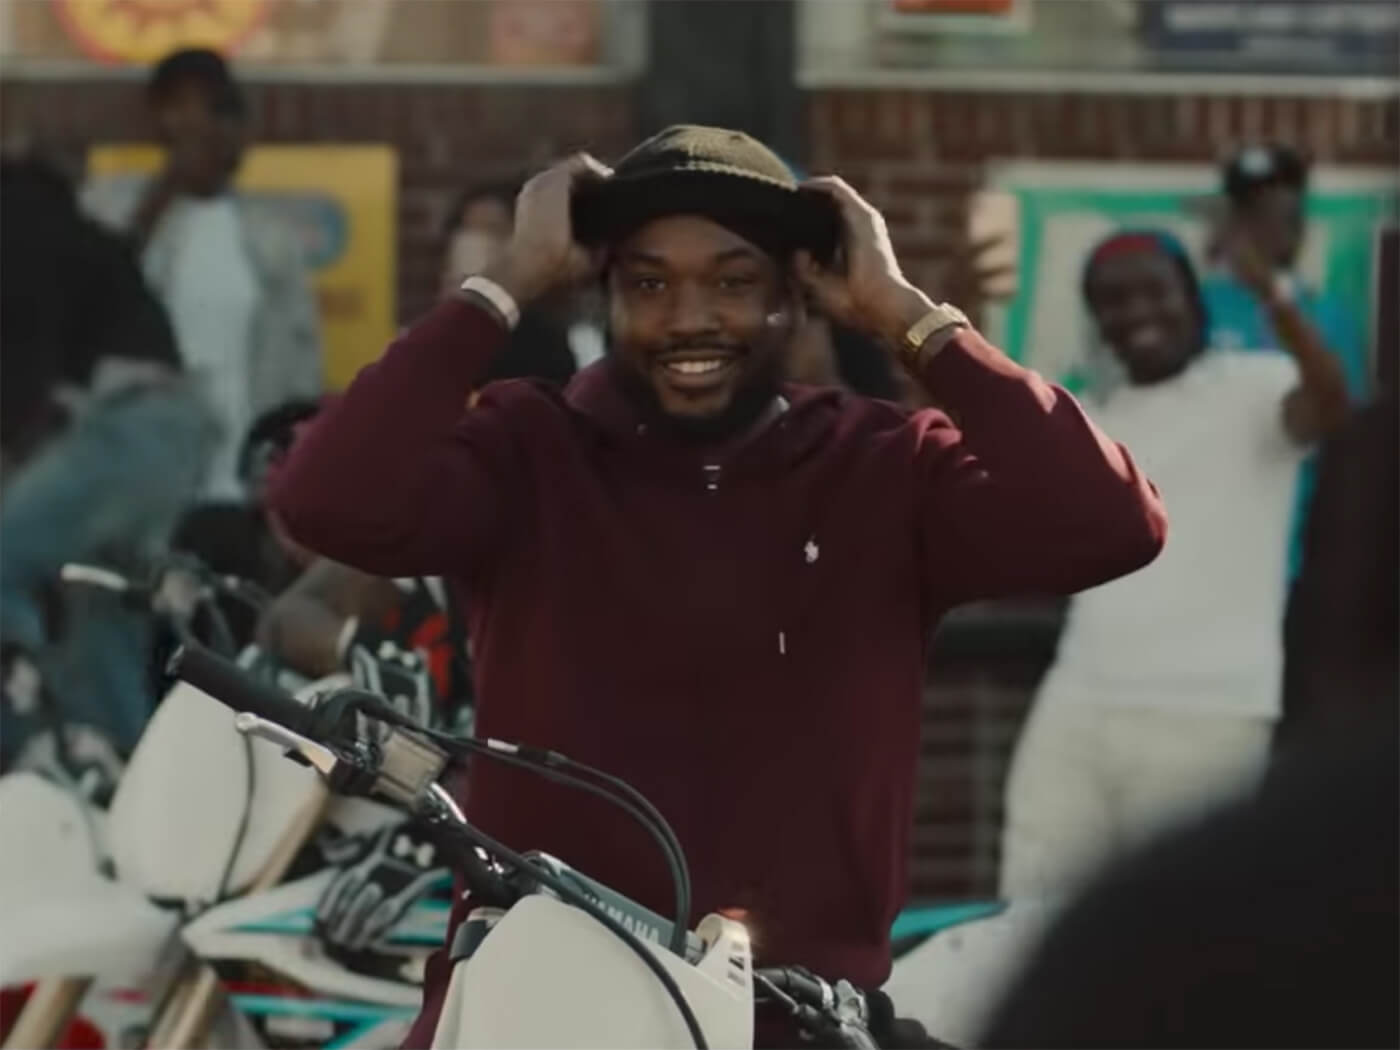 Meek Mill shows off his acting chops in 'Charm City Kings' trailer